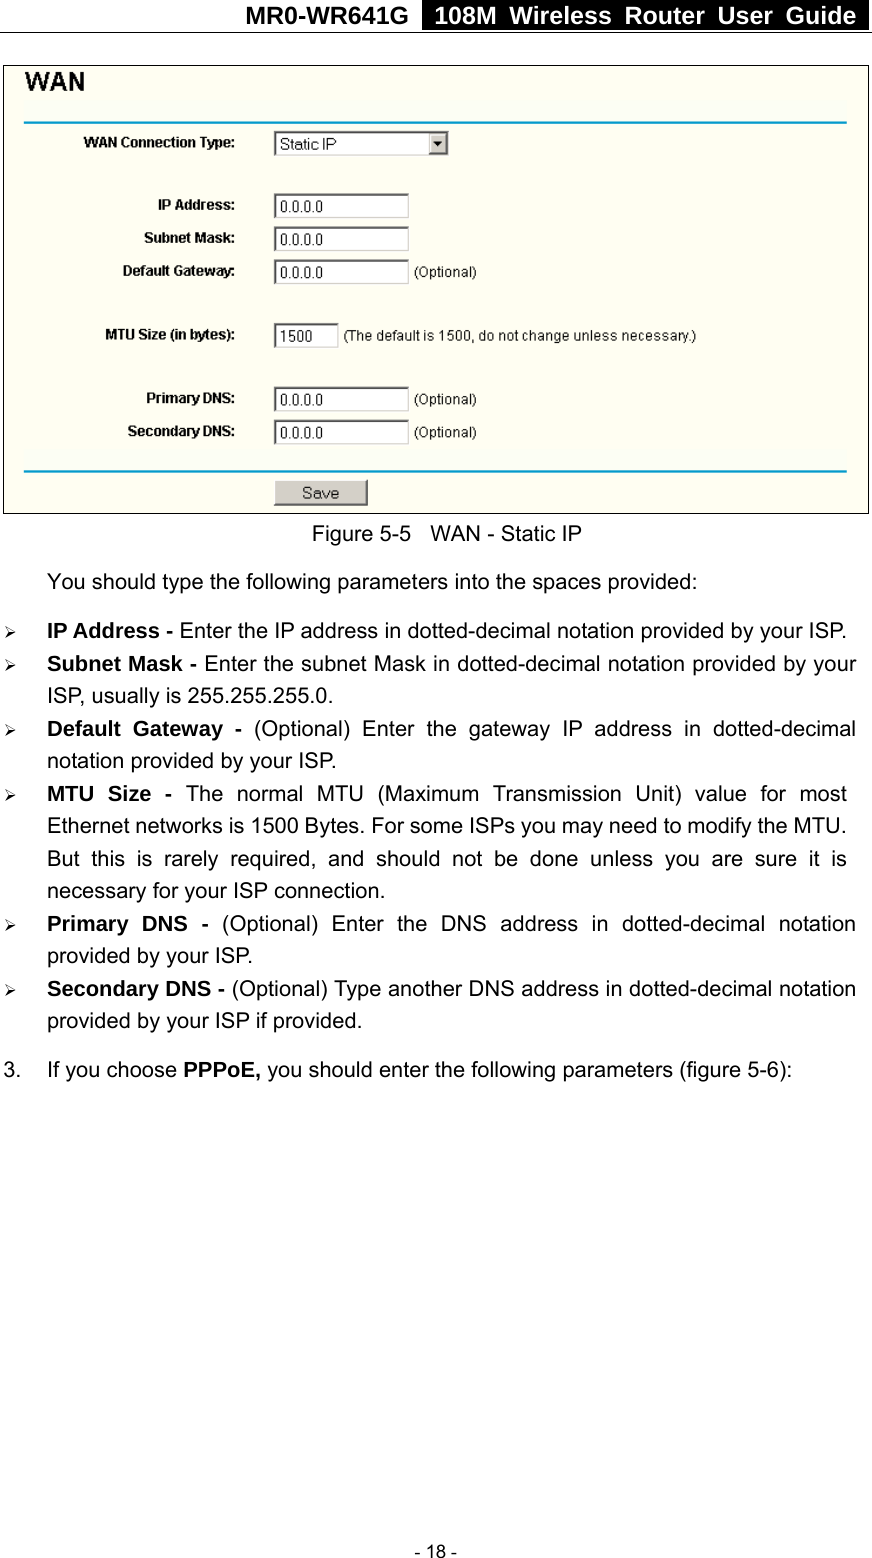 MR0-WR641G   108M Wireless Router User Guide   Figure 5-5  WAN - Static IP You should type the following parameters into the spaces provided: ¾ IP Address - Enter the IP address in dotted-decimal notation provided by your ISP. ¾ Subnet Mask - Enter the subnet Mask in dotted-decimal notation provided by your ISP, usually is 255.255.255.0. ¾ Default Gateway - (Optional) Enter the gateway IP address in dotted-decimal notation provided by your ISP. ¾ MTU Size - The normal MTU (Maximum Transmission Unit) value for most Ethernet networks is 1500 Bytes. For some ISPs you may need to modify the MTU. But this is rarely required, and should not be done unless you are sure it is necessary for your ISP connection. ¾ Primary DNS - (Optional) Enter the DNS address in dotted-decimal notation provided by your ISP. ¾ Secondary DNS - (Optional) Type another DNS address in dotted-decimal notation provided by your ISP if provided. 3.  If you choose PPPoE, you should enter the following parameters (figure 5-6):    - 18 - 